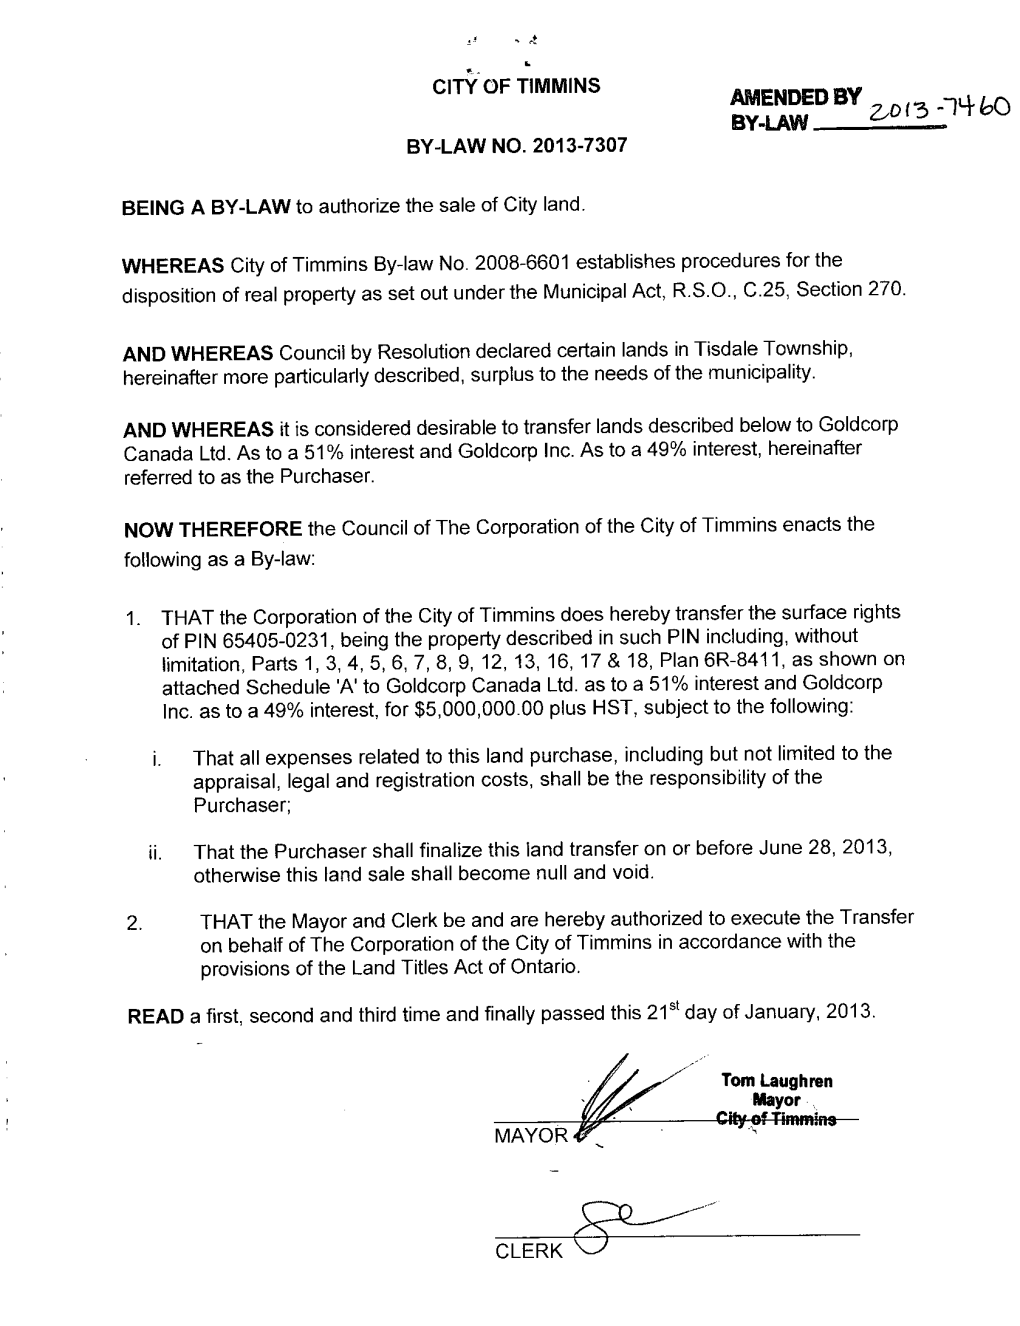 WHEREAS City of Timmins By-Law No. 2008-6601 Establishes Procedures for the Disposition of Real Property As Set out Under the Municipal Act, R.S.O., C.25, Section 270